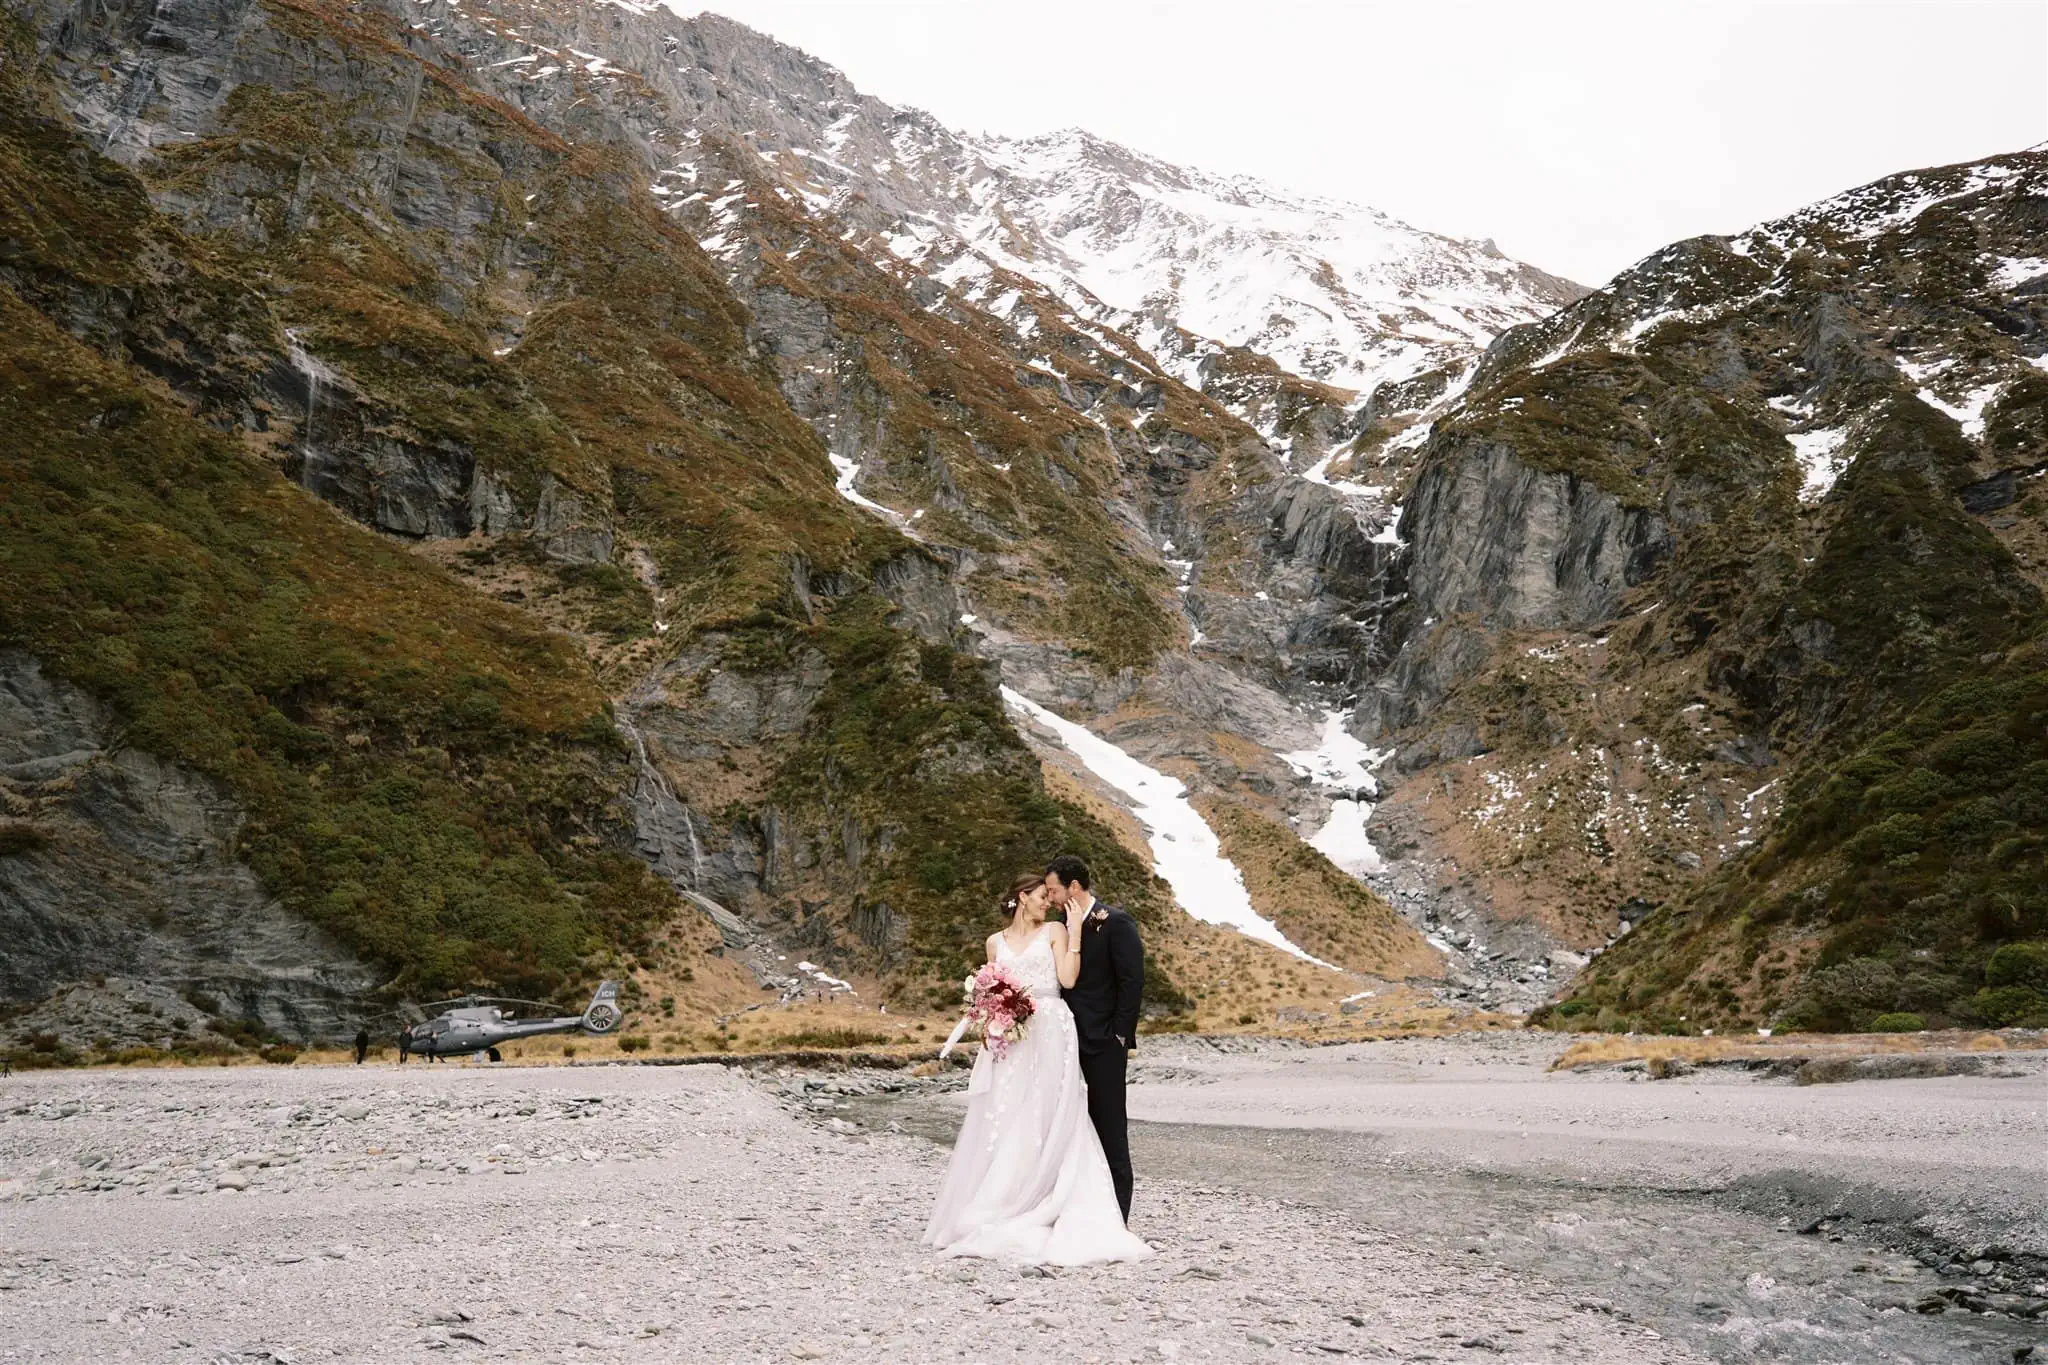 Queenstown New Zealand Elopement Wedding Photographer - Shahar and Alex, a bride and groom, enjoy a romantic Stargazing Date by the river in New Zealand.